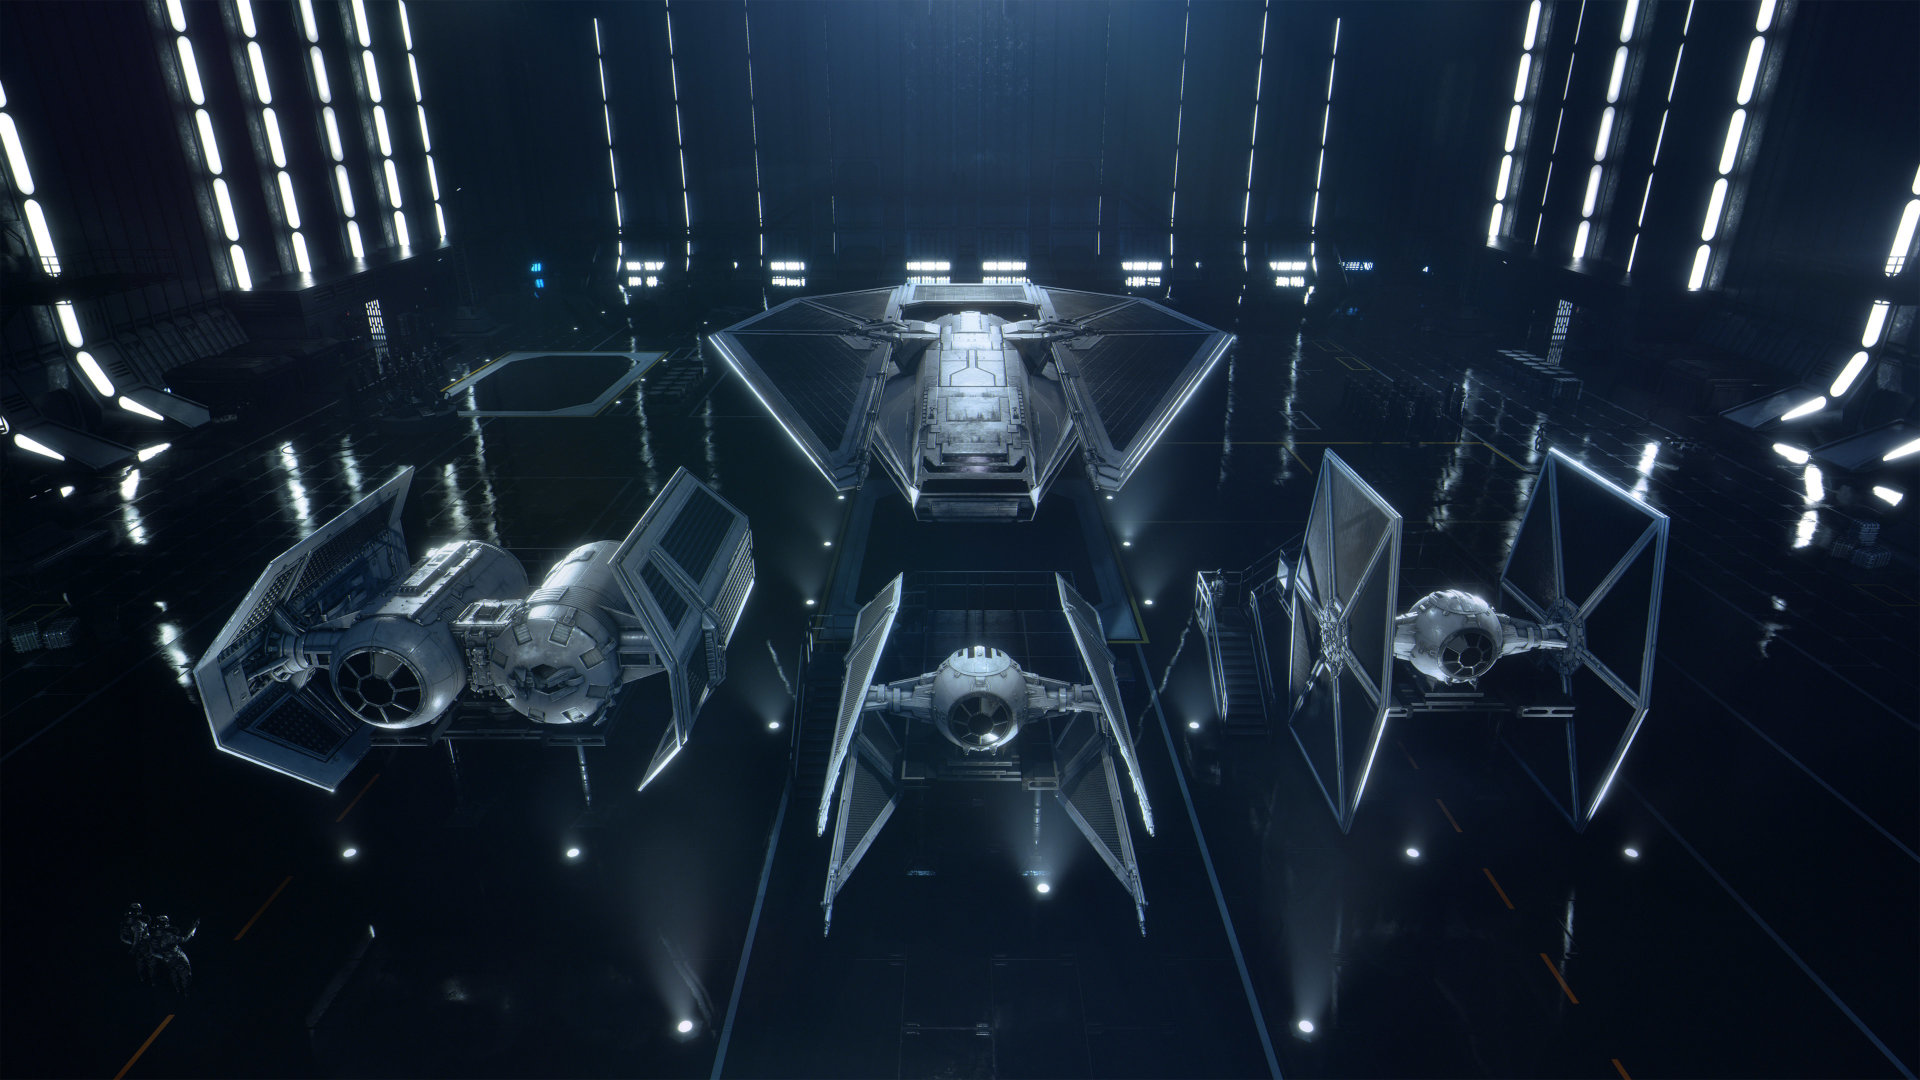 The 10 coolest Star Wars TIE fighters, ranked